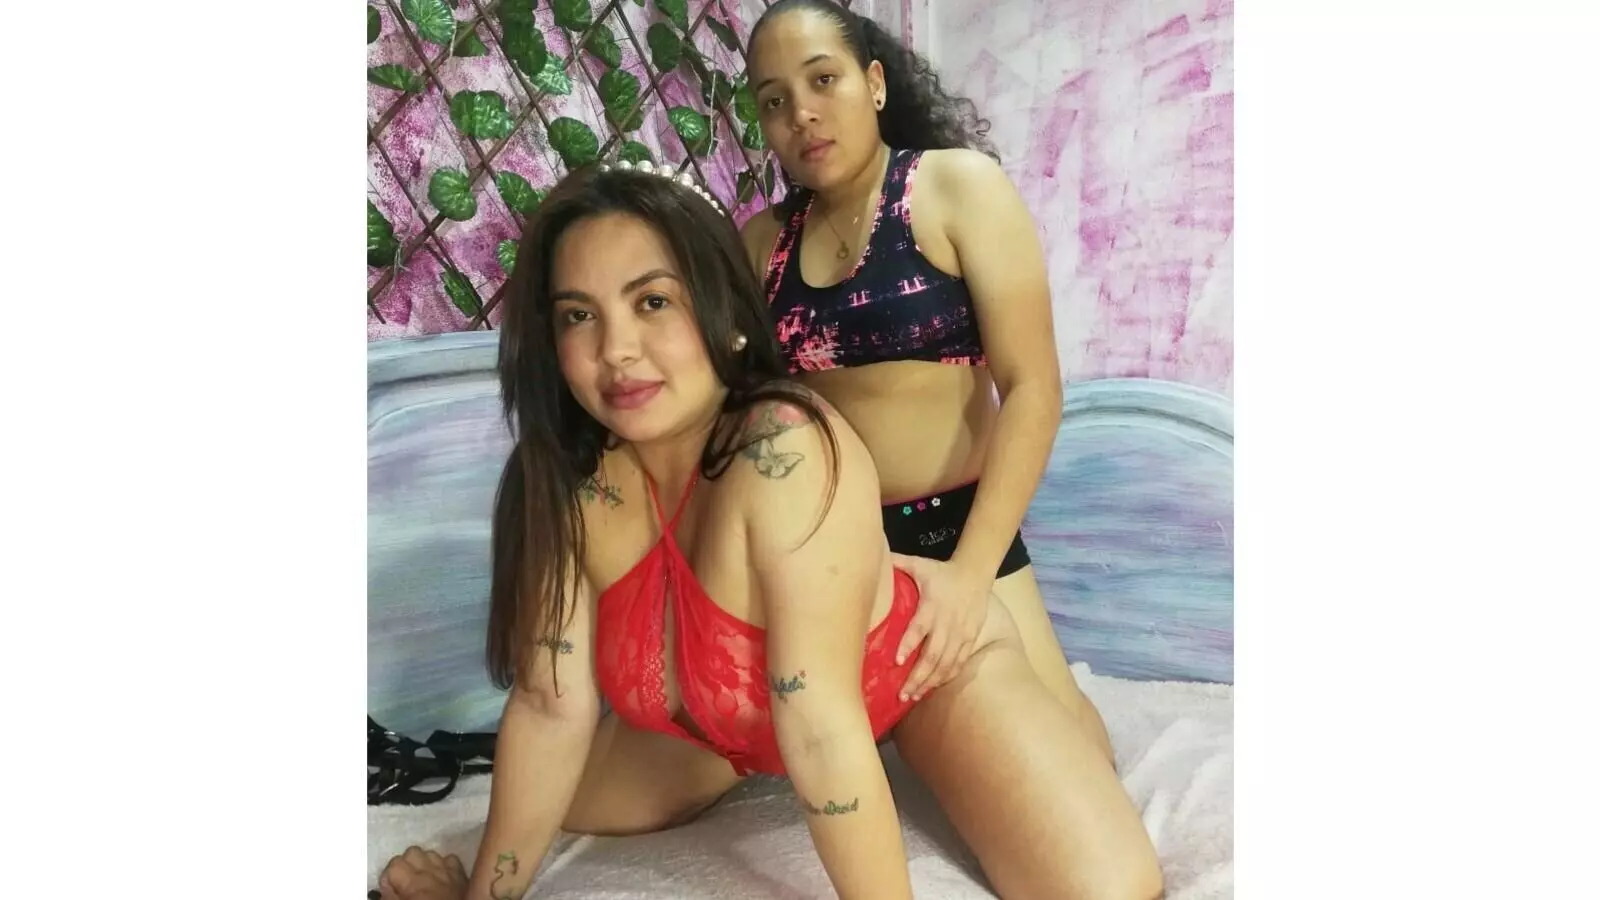 SharonandBritany's Premium Pictures and Videos